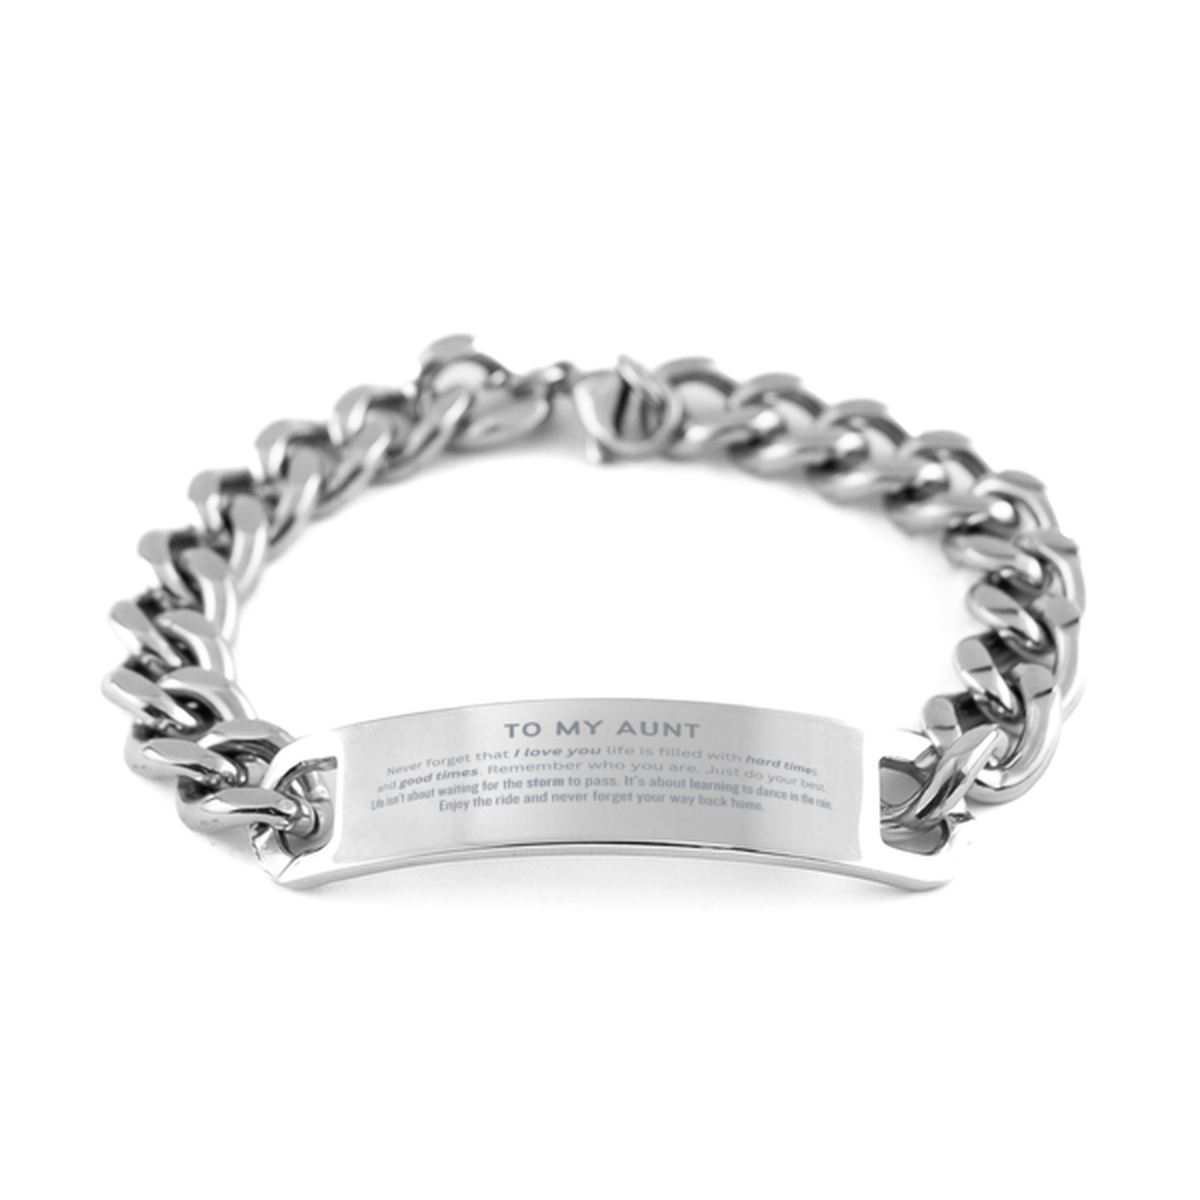 Christmas Aunt Cuban Chain Stainless Steel Bracelet Gifts, To My Aunt Birthday Thank You Gifts For Aunt, Graduation Unique Gifts For Aunt To My Aunt Never forget that I love you life is filled with hard times and good times. Remember who you are. Just do